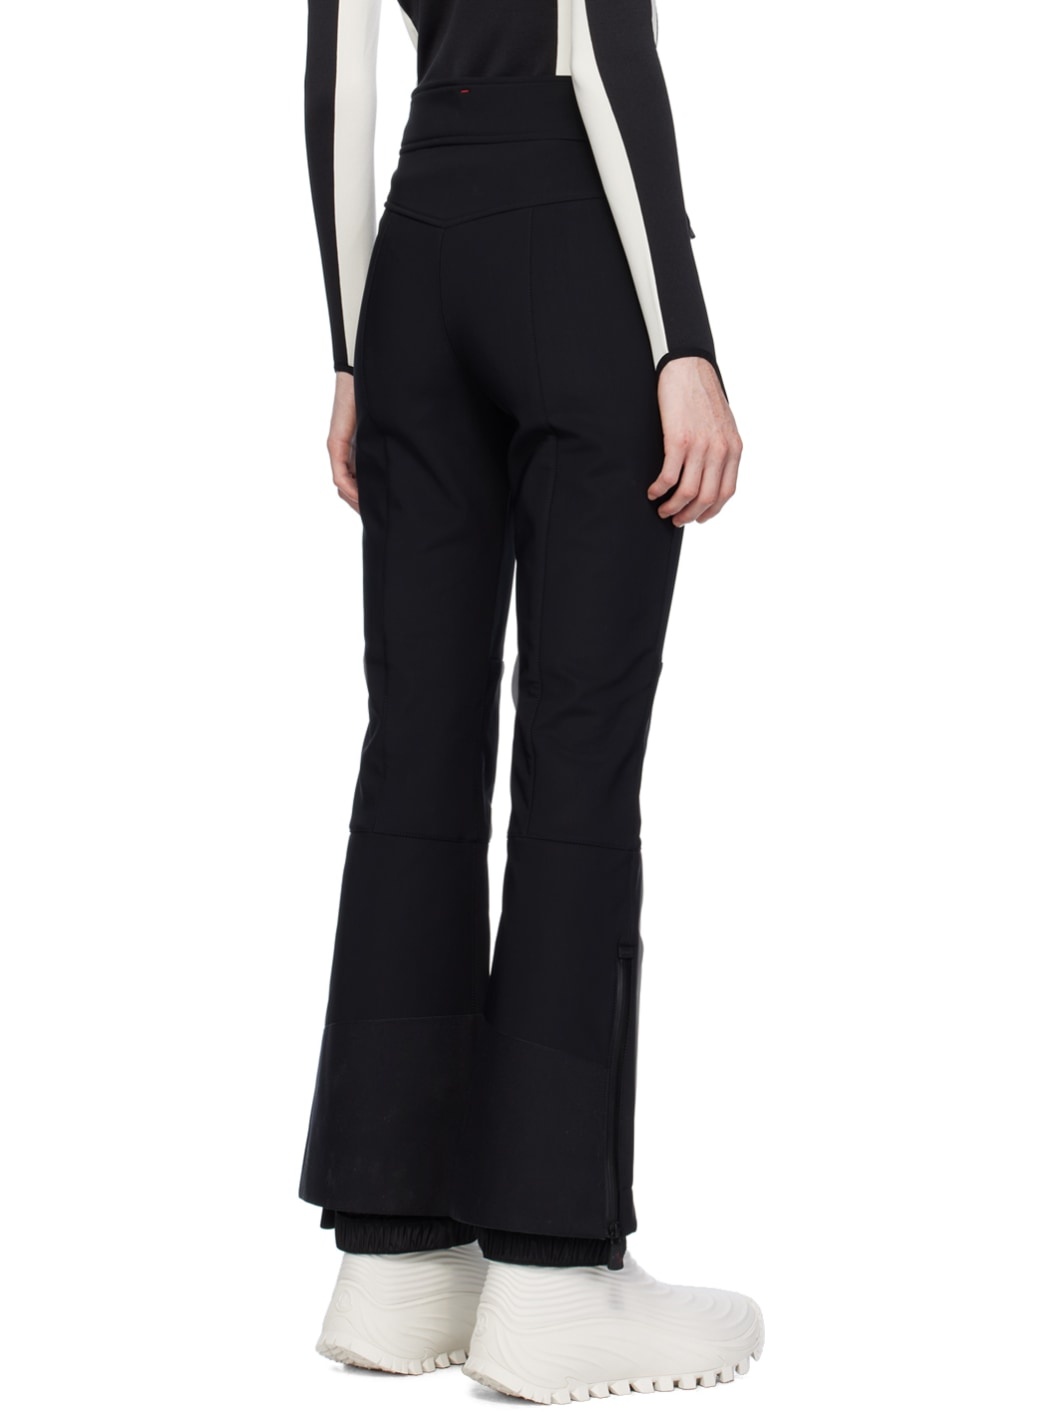 Black Patch Trousers - 3